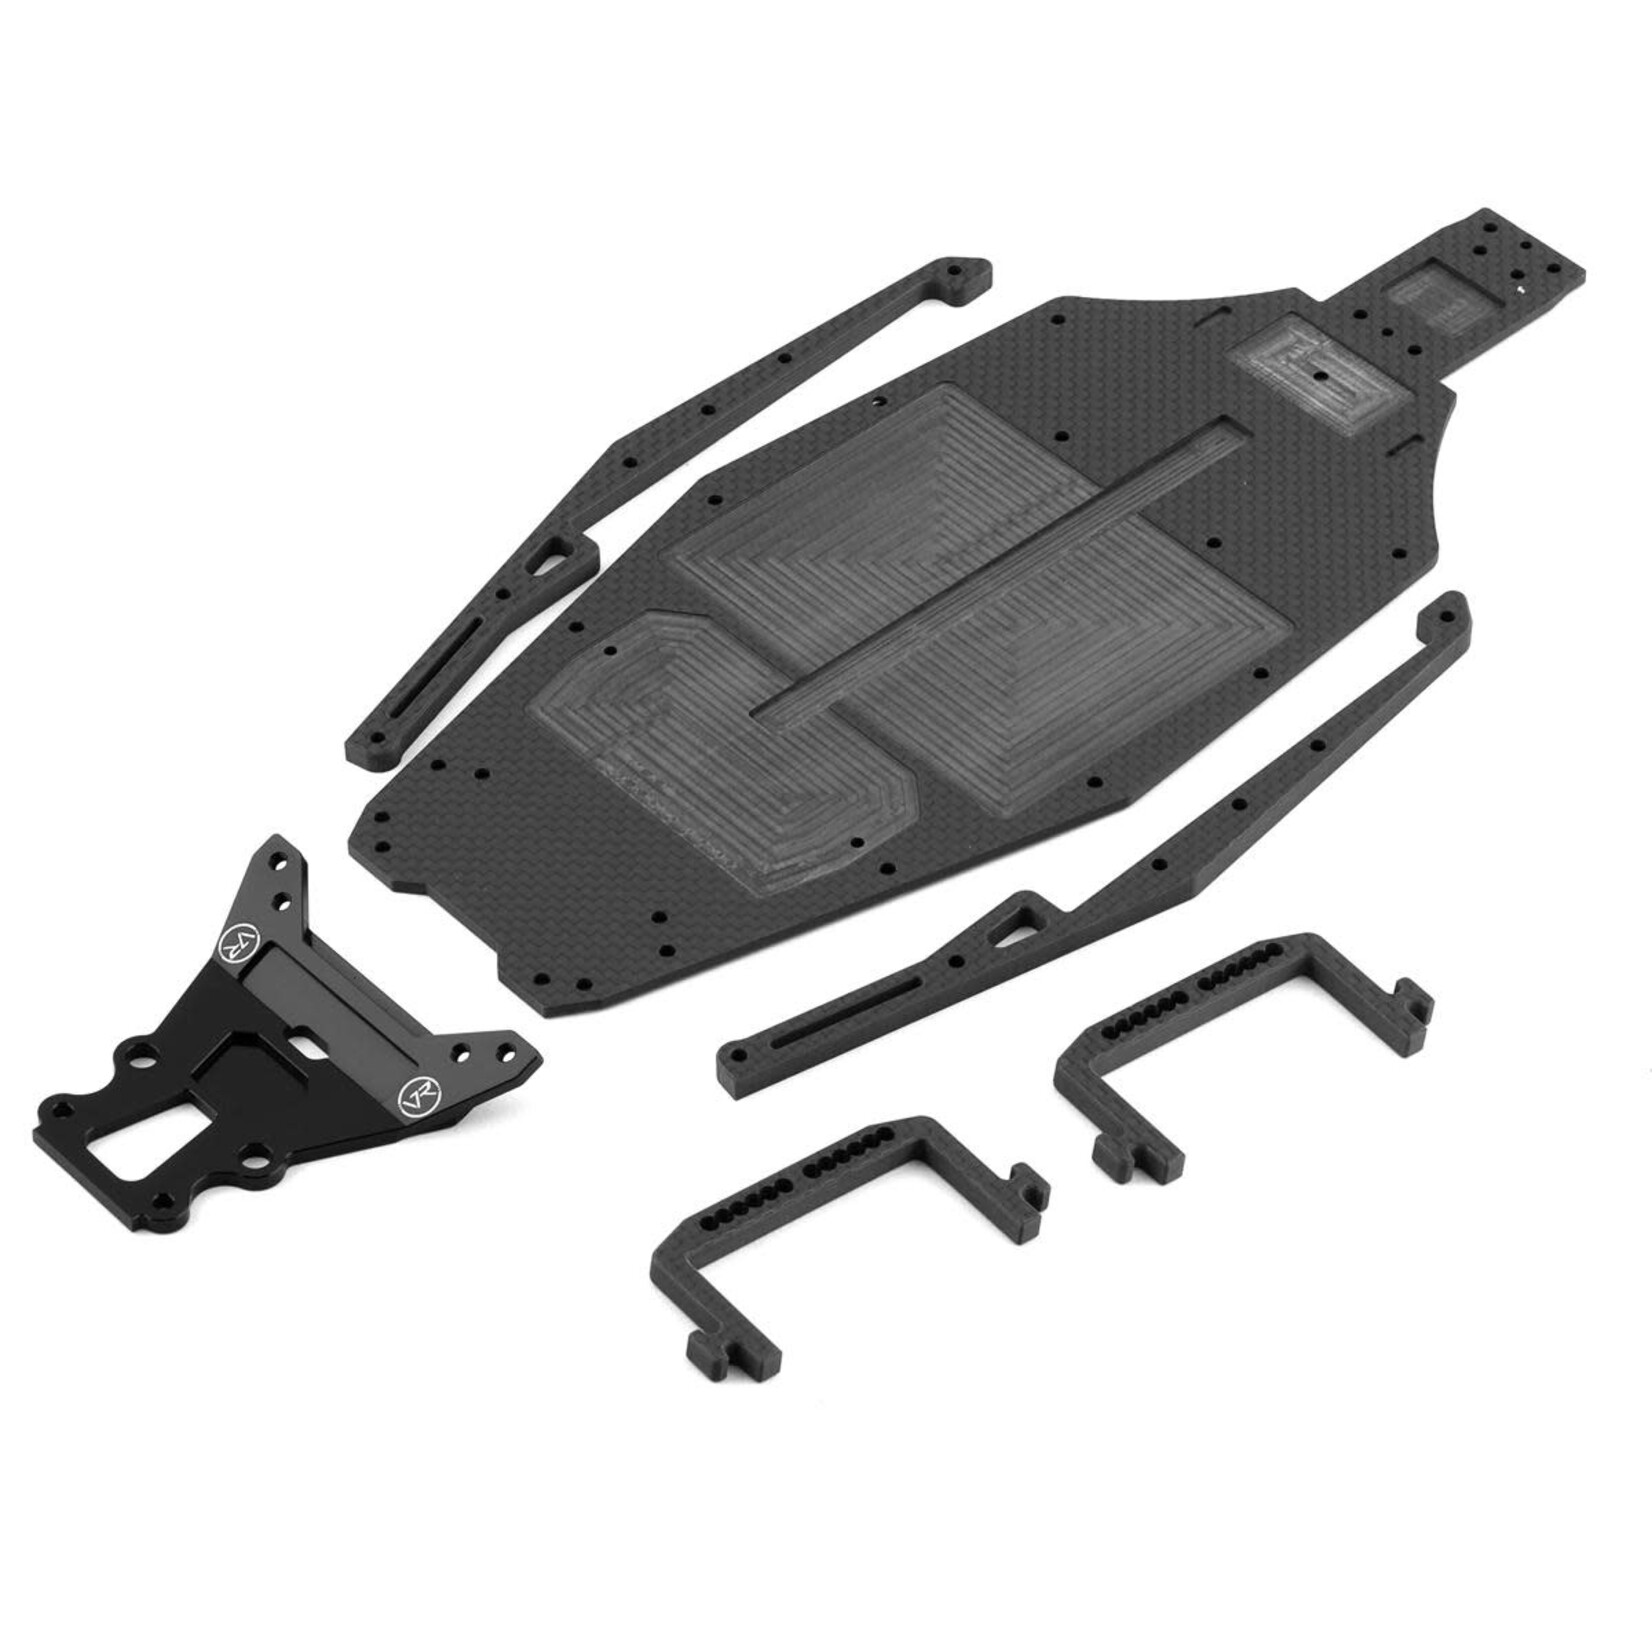 Vision Racing Vision Racing TLR 22 5.0 +4mm Carbon Fiber Chassis 2022 #00267